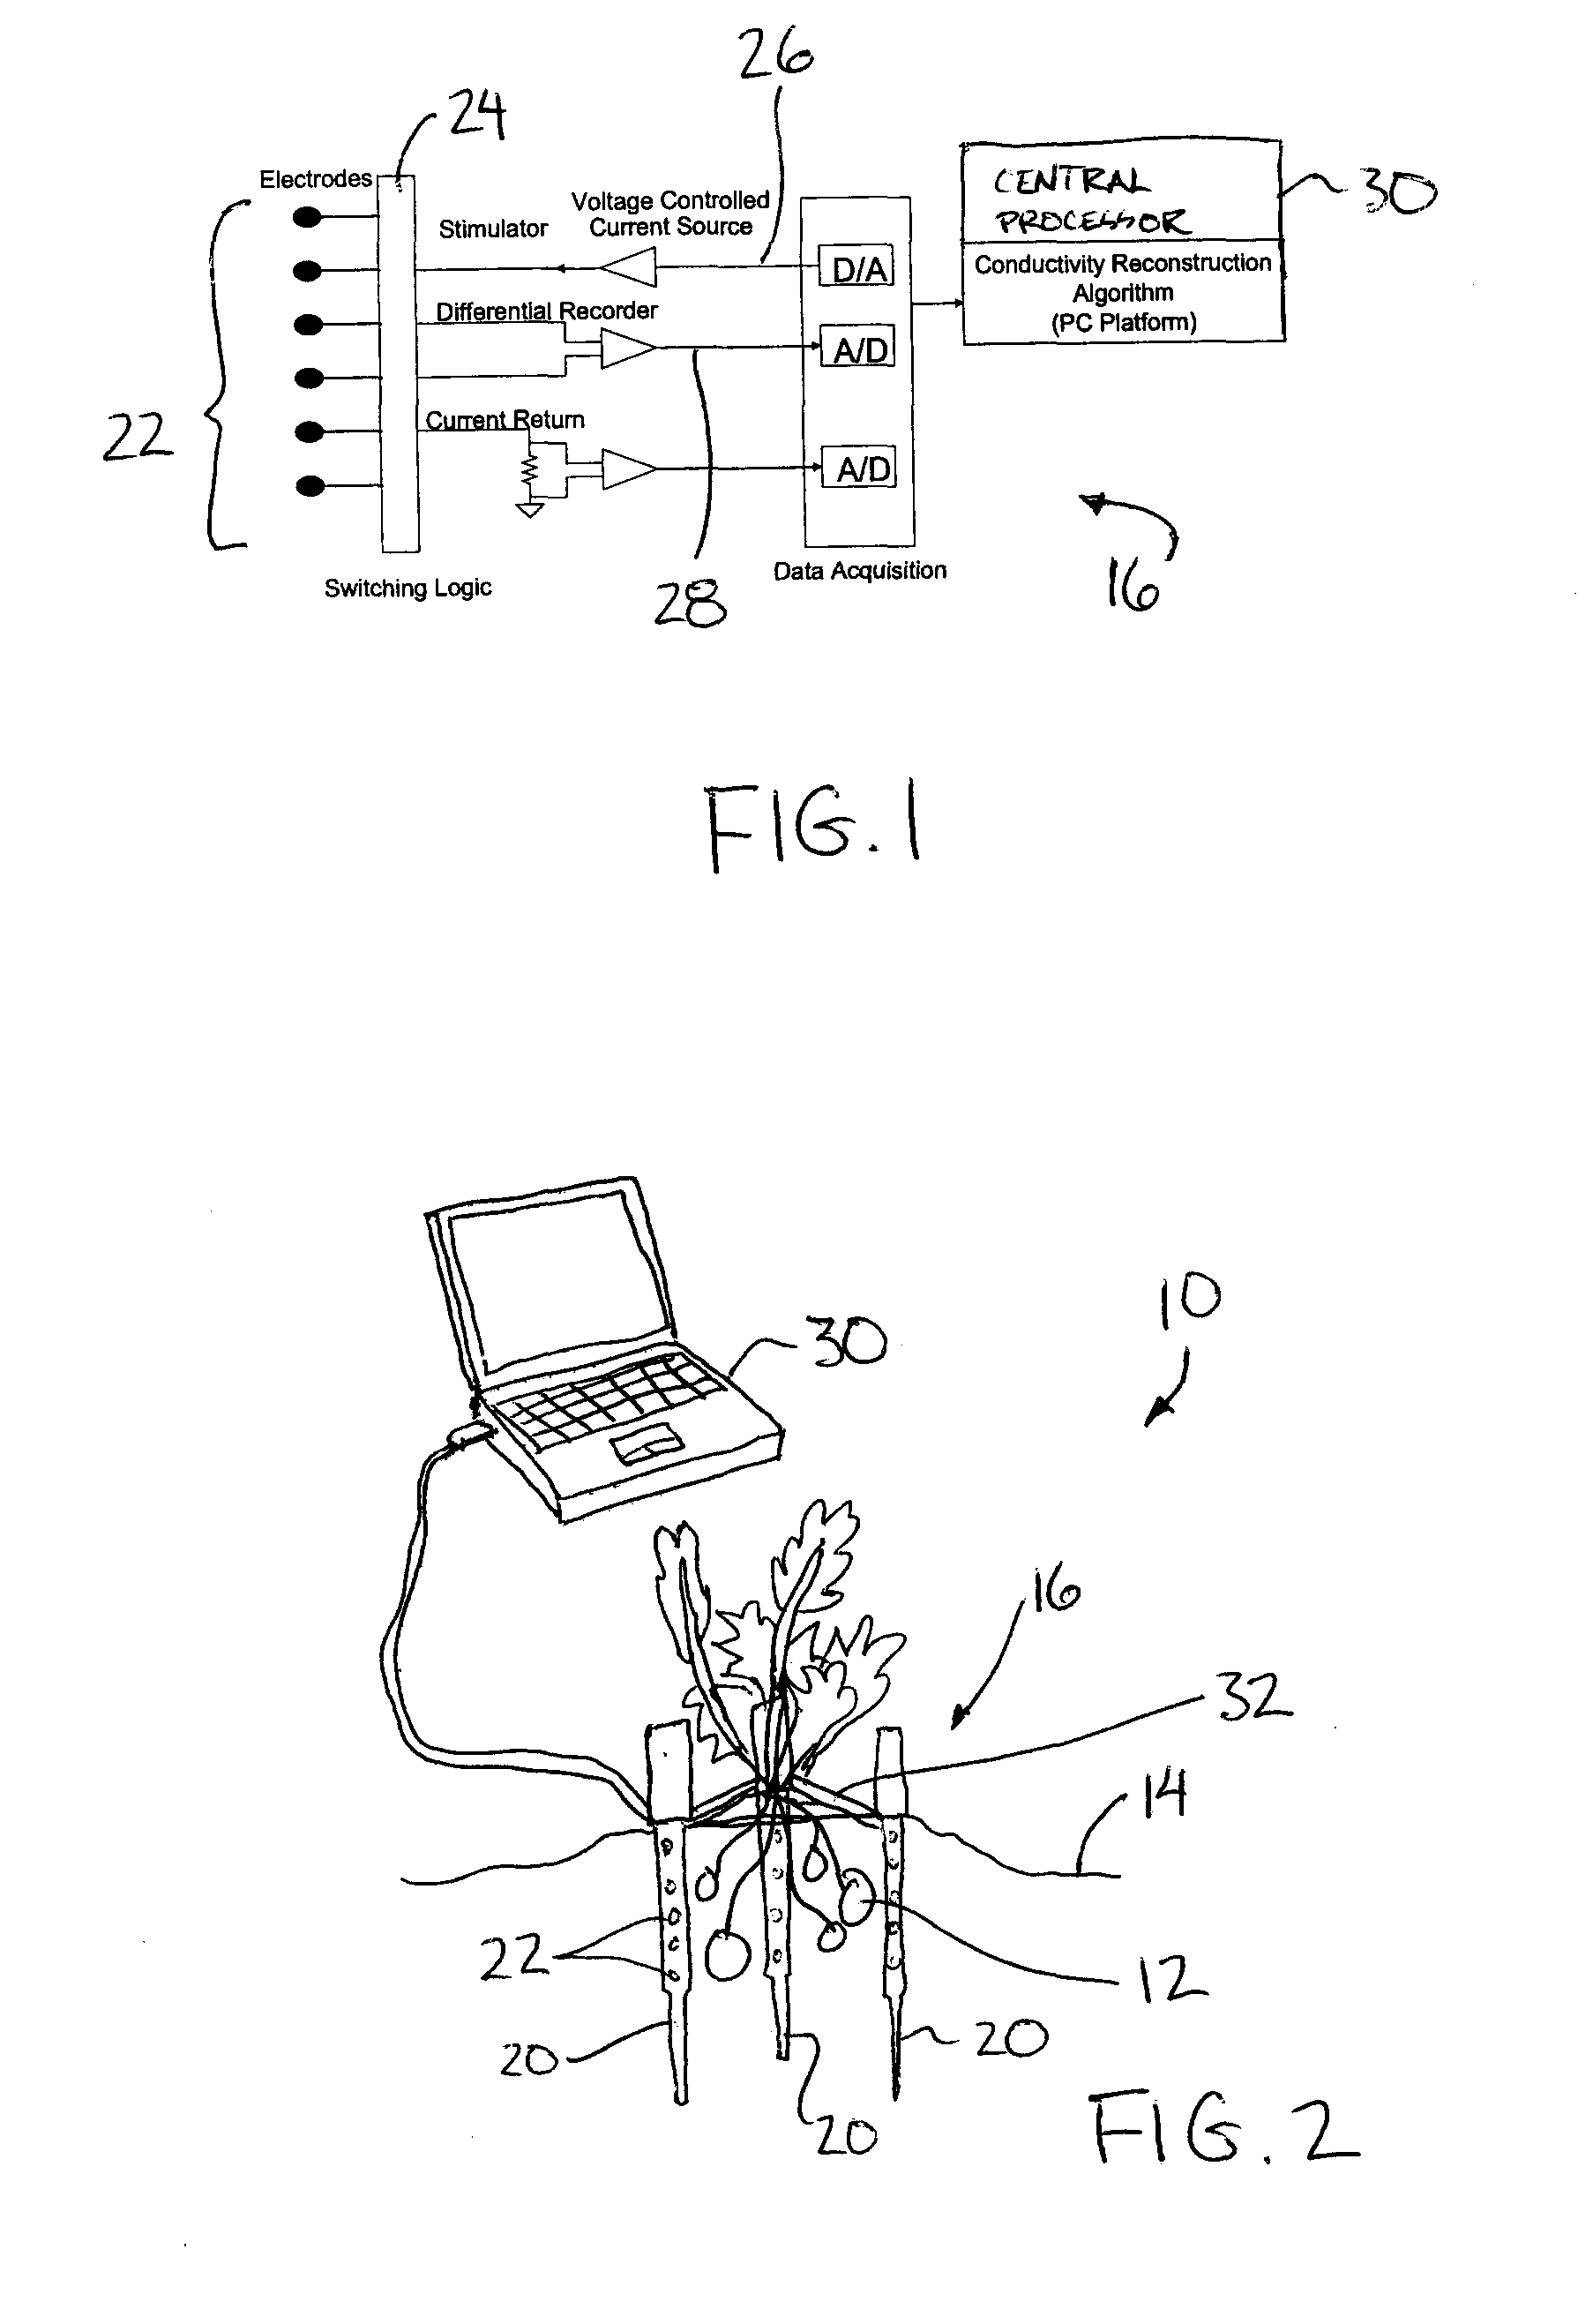 Method and System for Monitoring Growth Characteristics